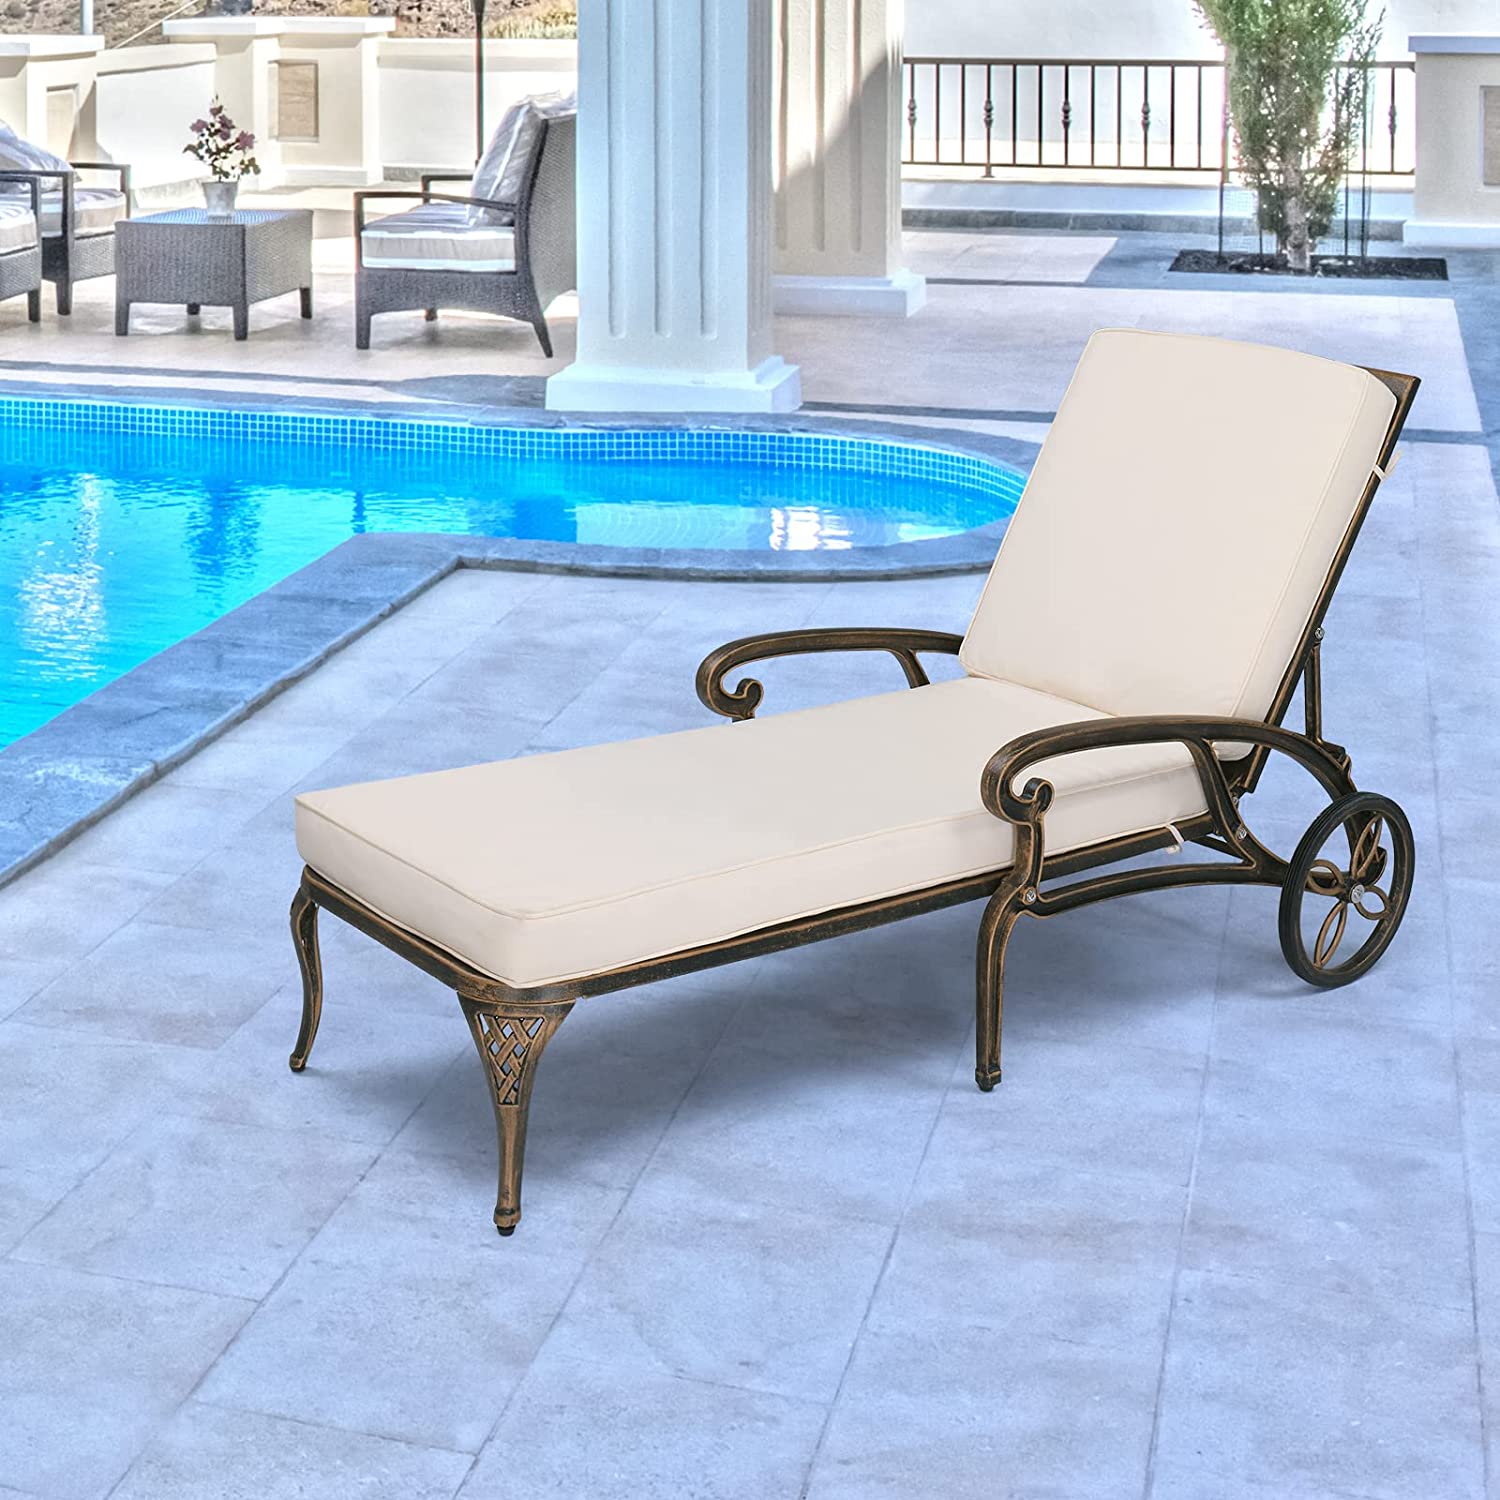 VINGLI Cast Aluminum Outdoor Chaise Lounge Chair with Wheels, Tanning Chair with 3-Position Adjustable Backrest, Patio Chaise Lounge Reclining Chair Poolside Lounge Chair(Bronze, with Cushion) - image 1 of 7